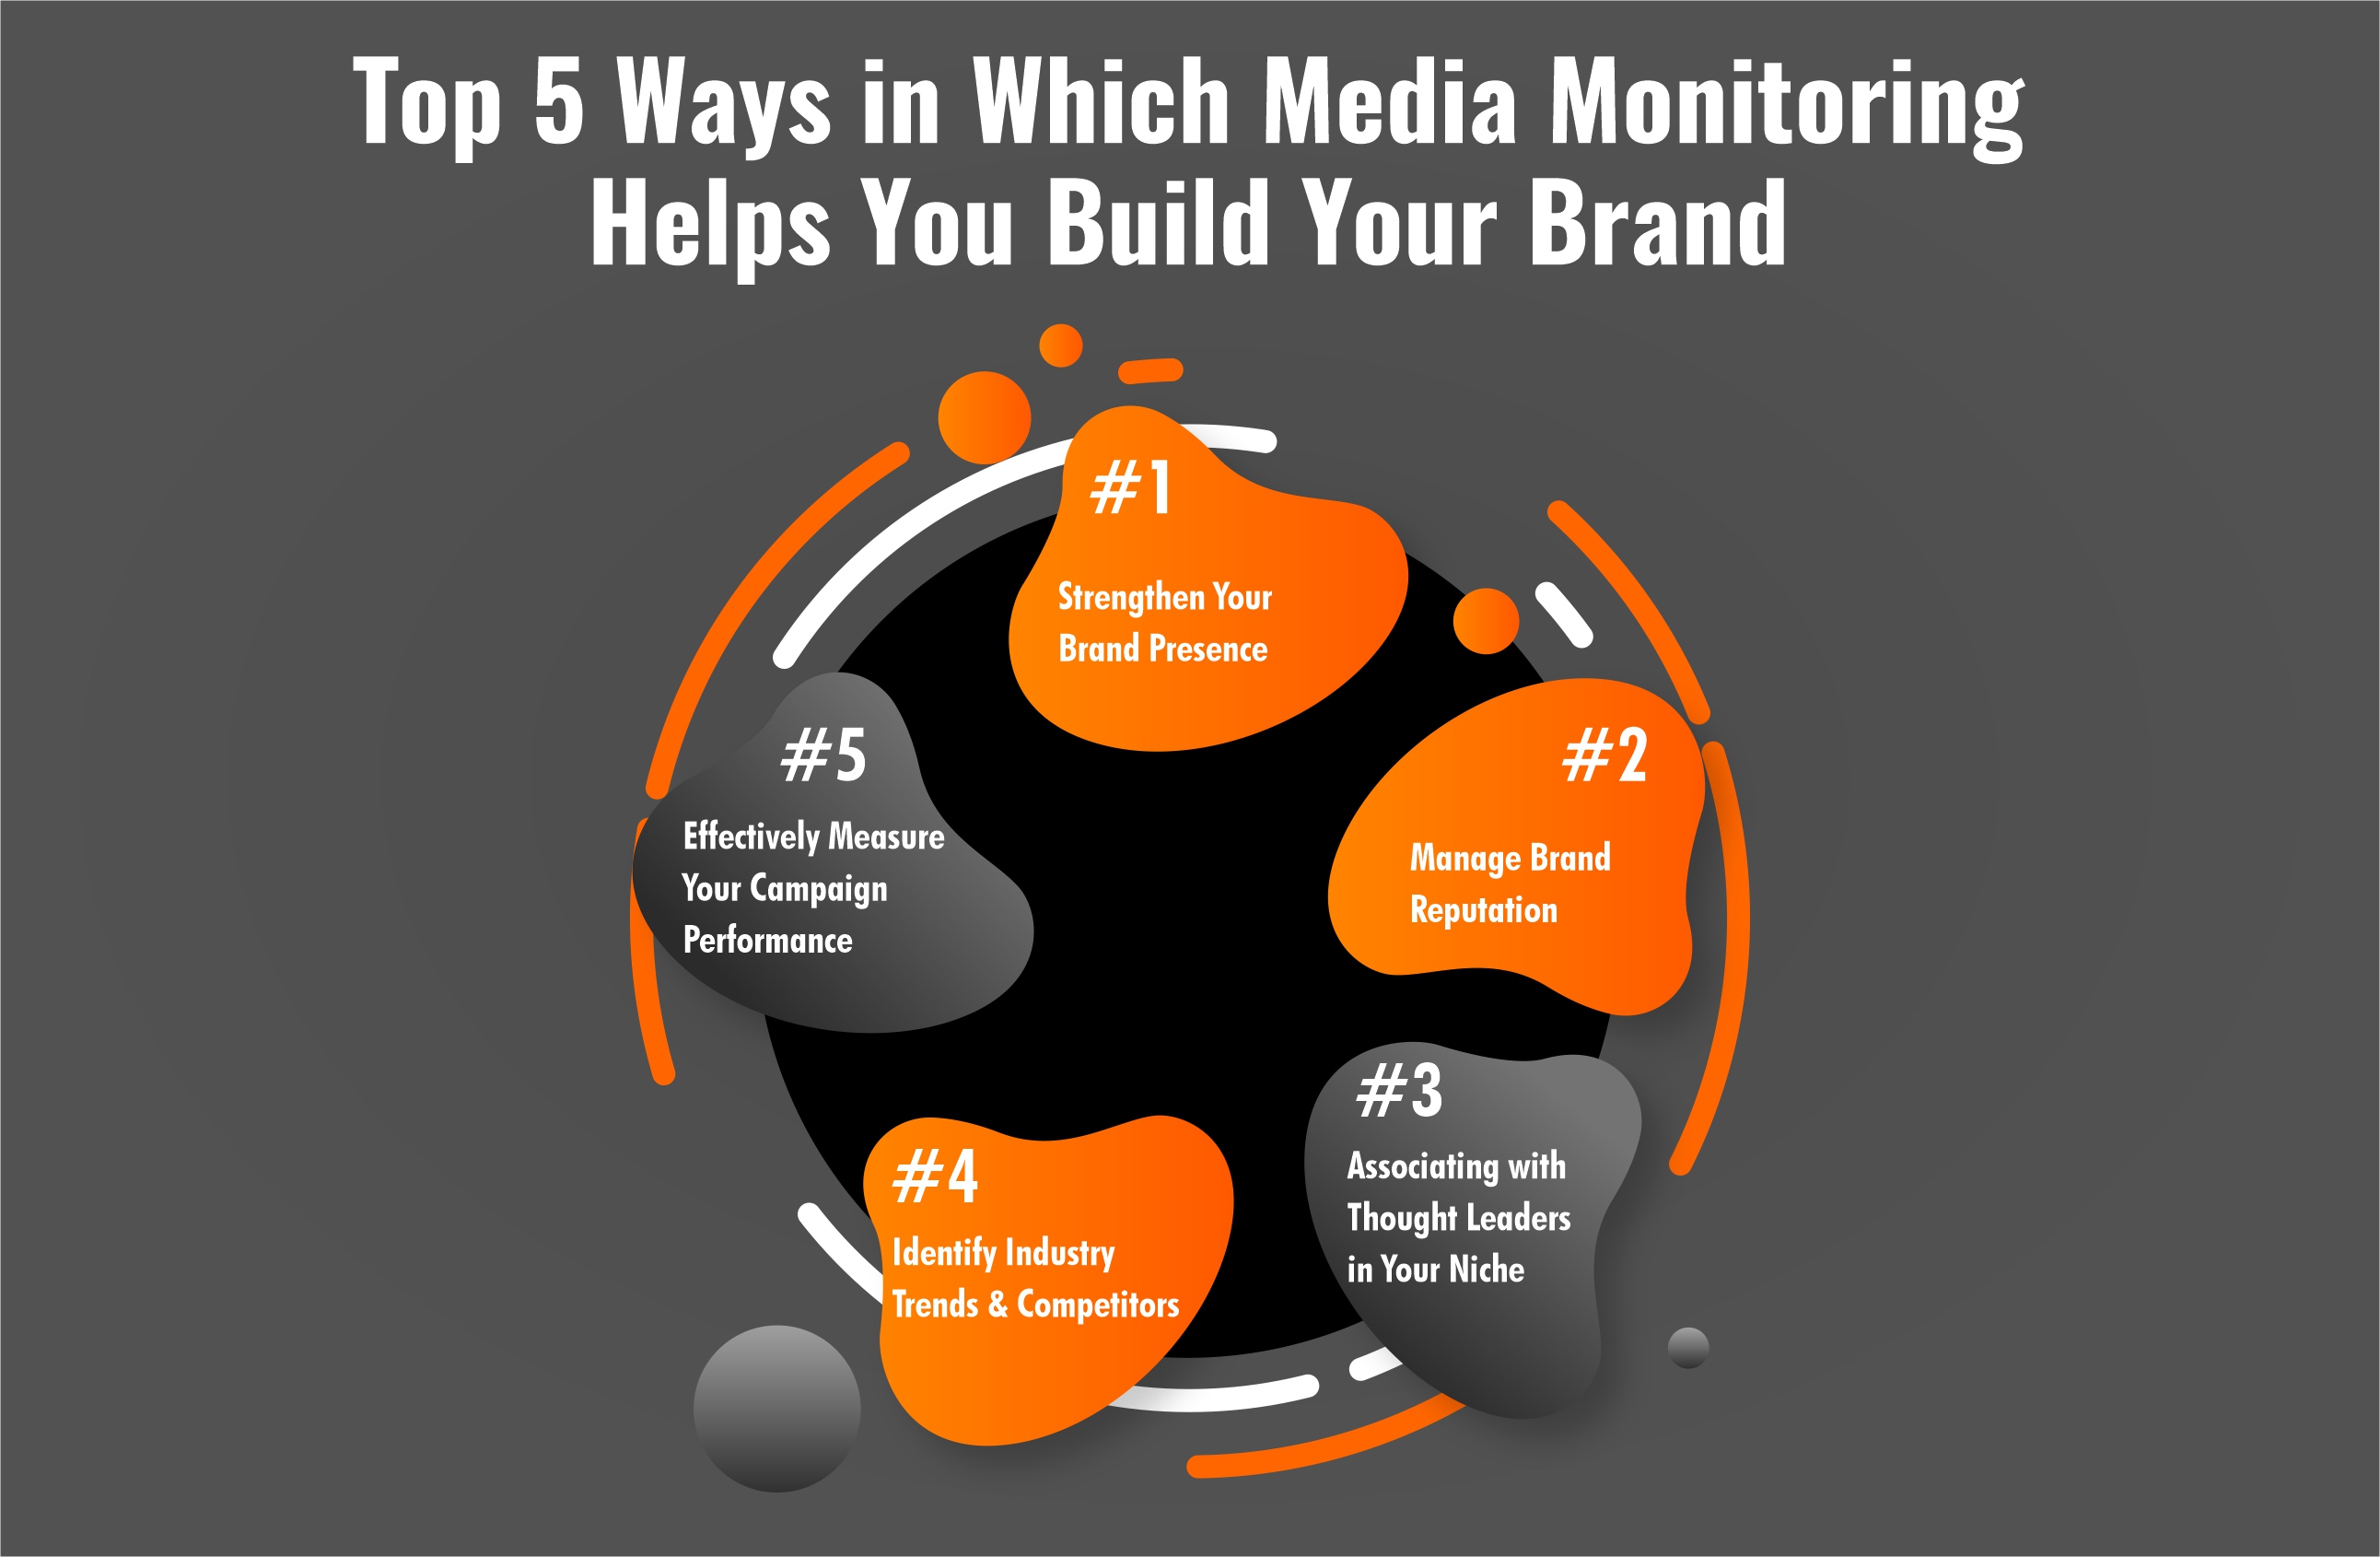 Top 5 Ways in Which Media Monitoring Helps You Build Your Brand